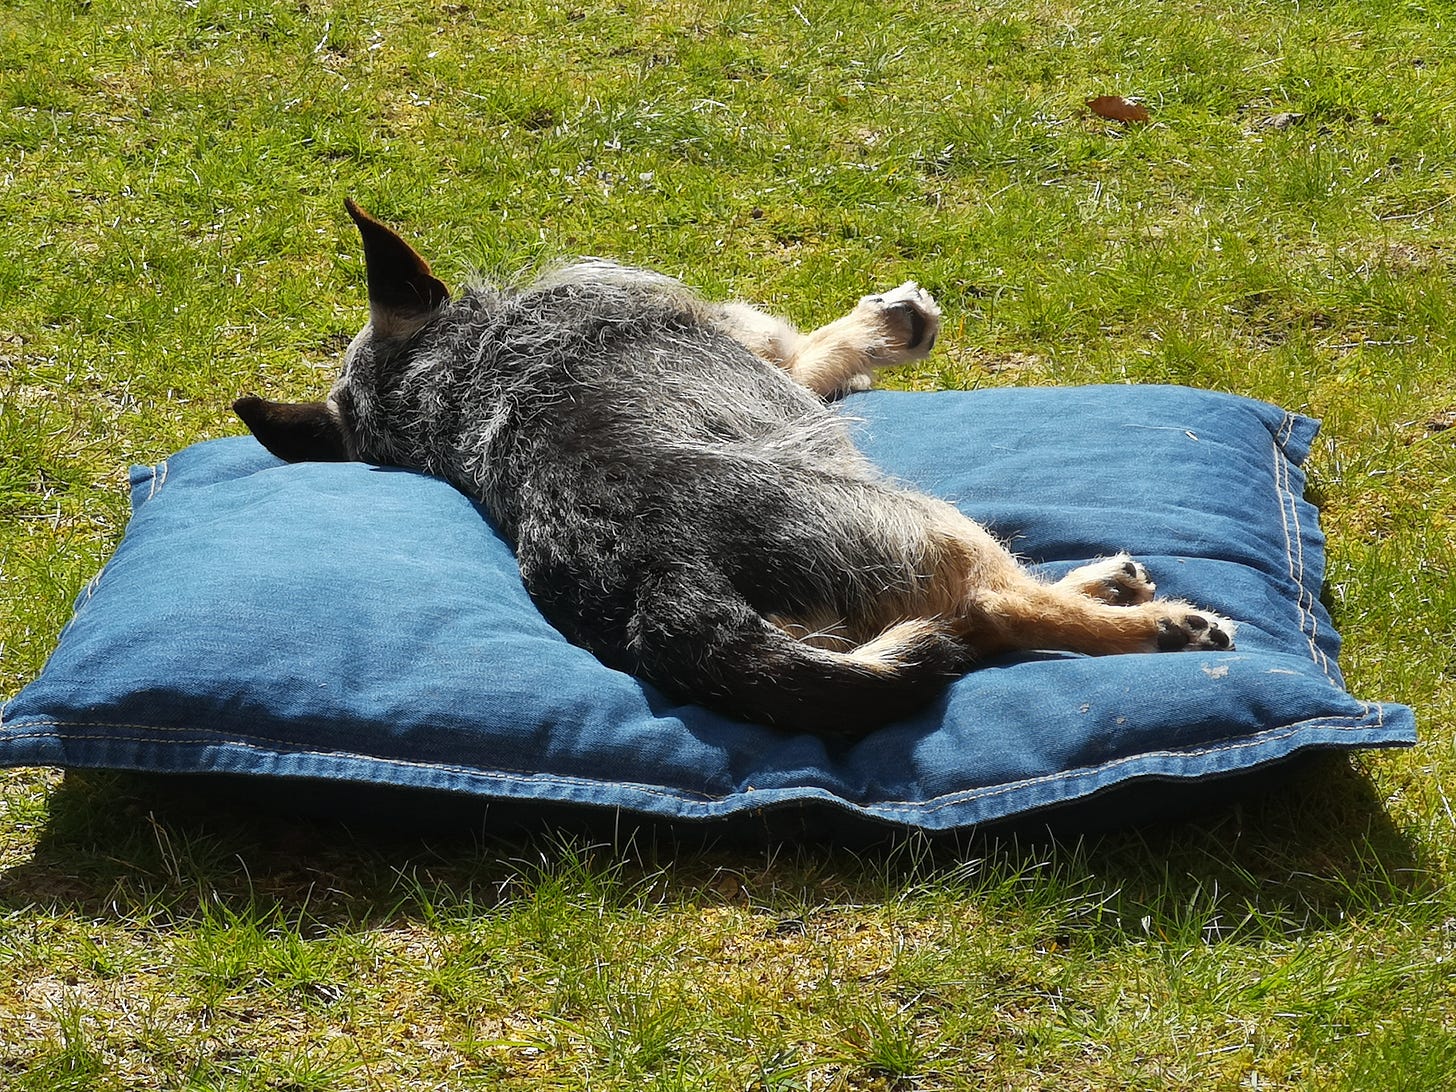 Jack the dog, a scruffy black and tan terrier, lies flopped sideways on a blue cushion in the sunshine.